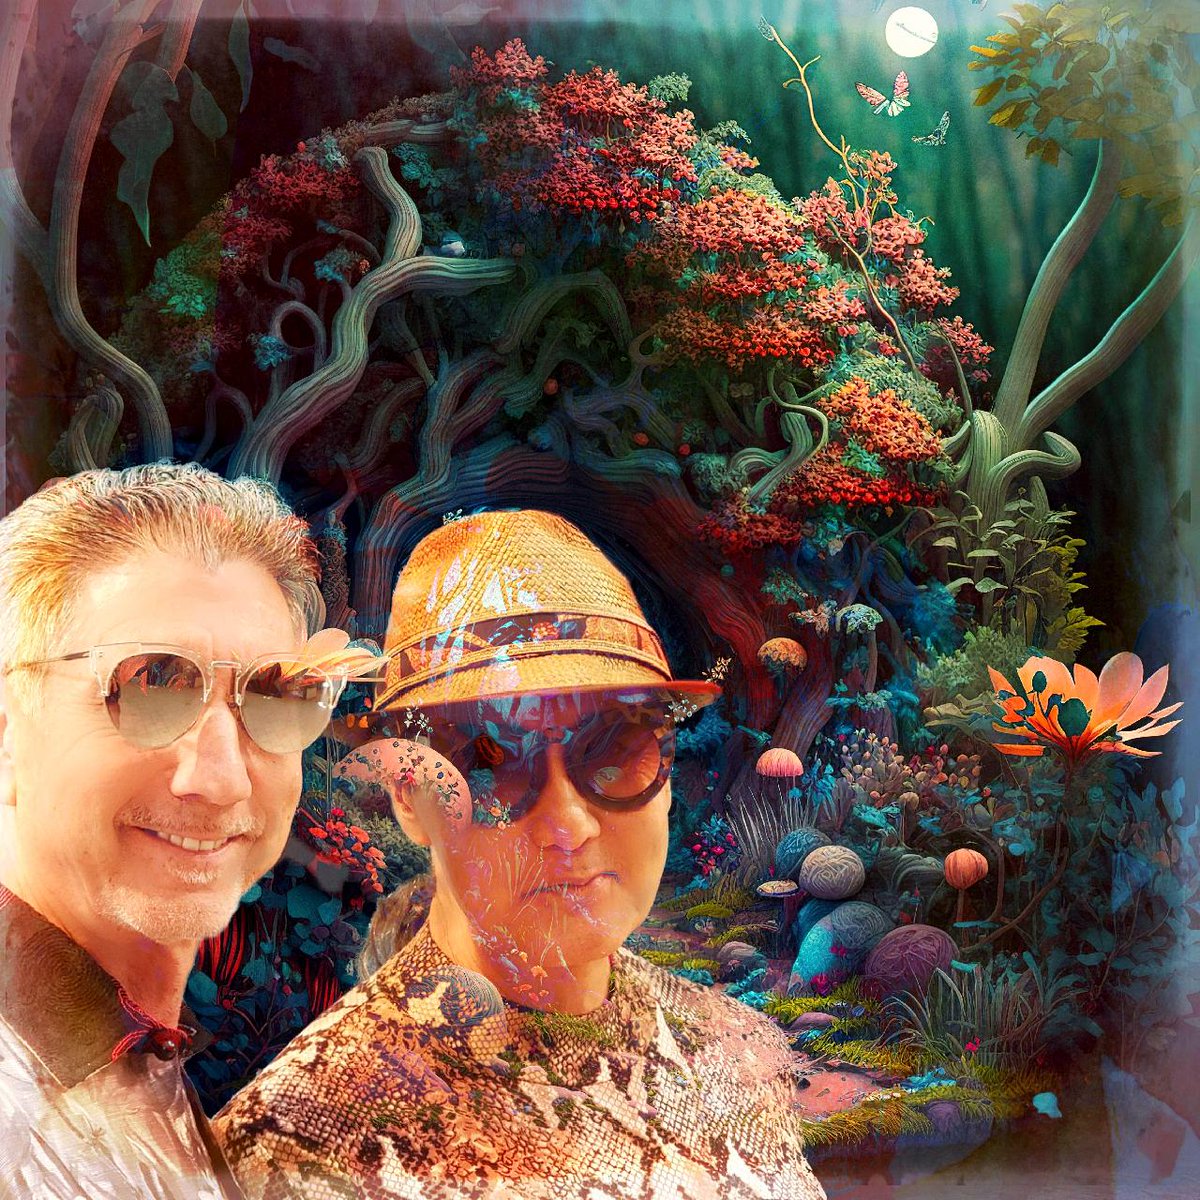 INTO THE WOODS 
Interested in an art piece of yourself in a fantastical backdrop, send me a photo (1000 pixels or higher) and I'll create it for you at a reasonable fee.
PM /contact me at bernard@bernardfoong.com for info.
#AIArtwork #artificialintelligenceart